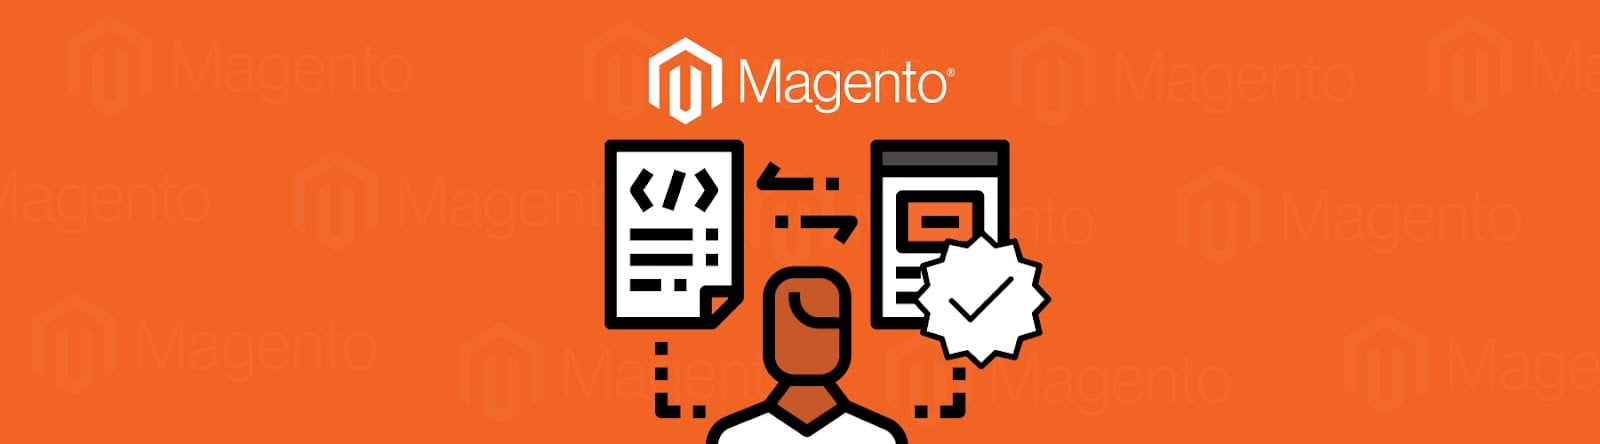 Overview of Magento 2 Certification